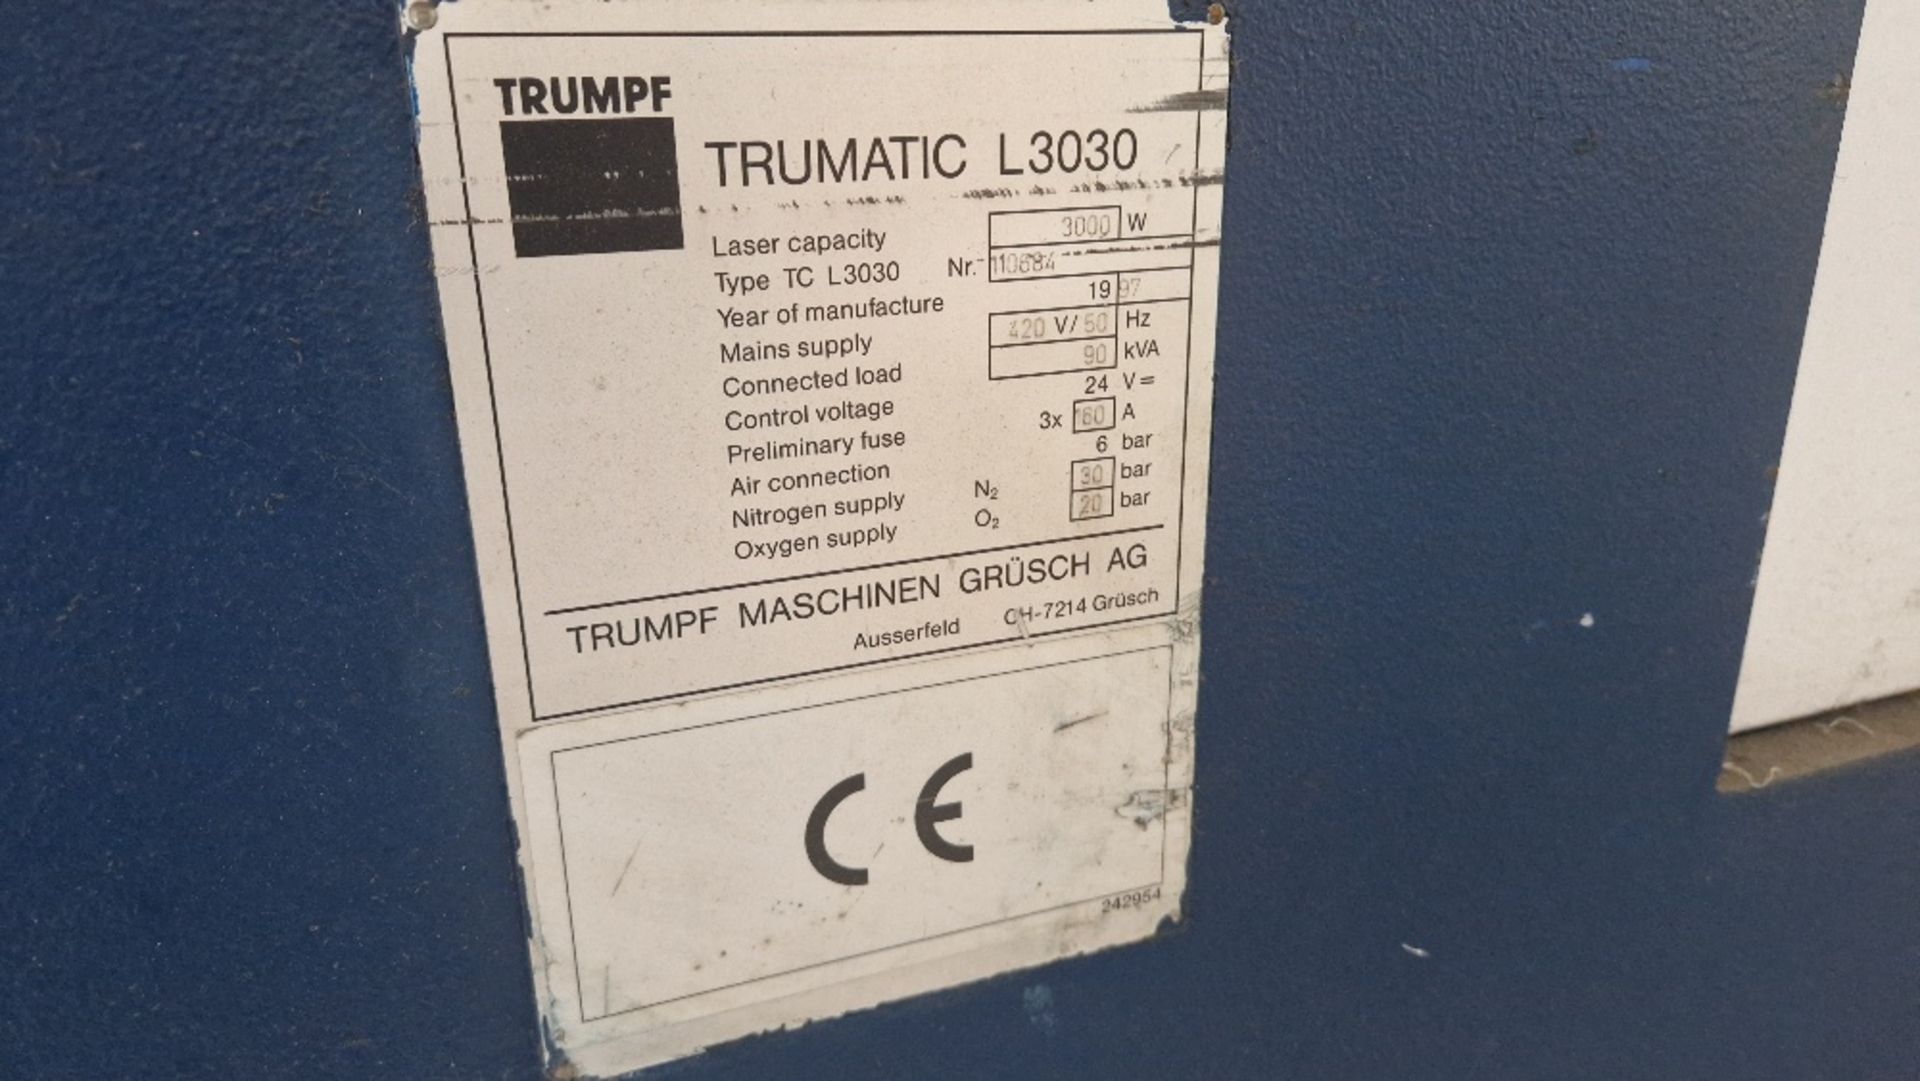 TRUMPH TRUEMATIC L3030 LASER CUTTER, LASER CAPACITY 3000W, YEAR 1991, SERIAL NUMBER: 110884. *** - Image 8 of 12